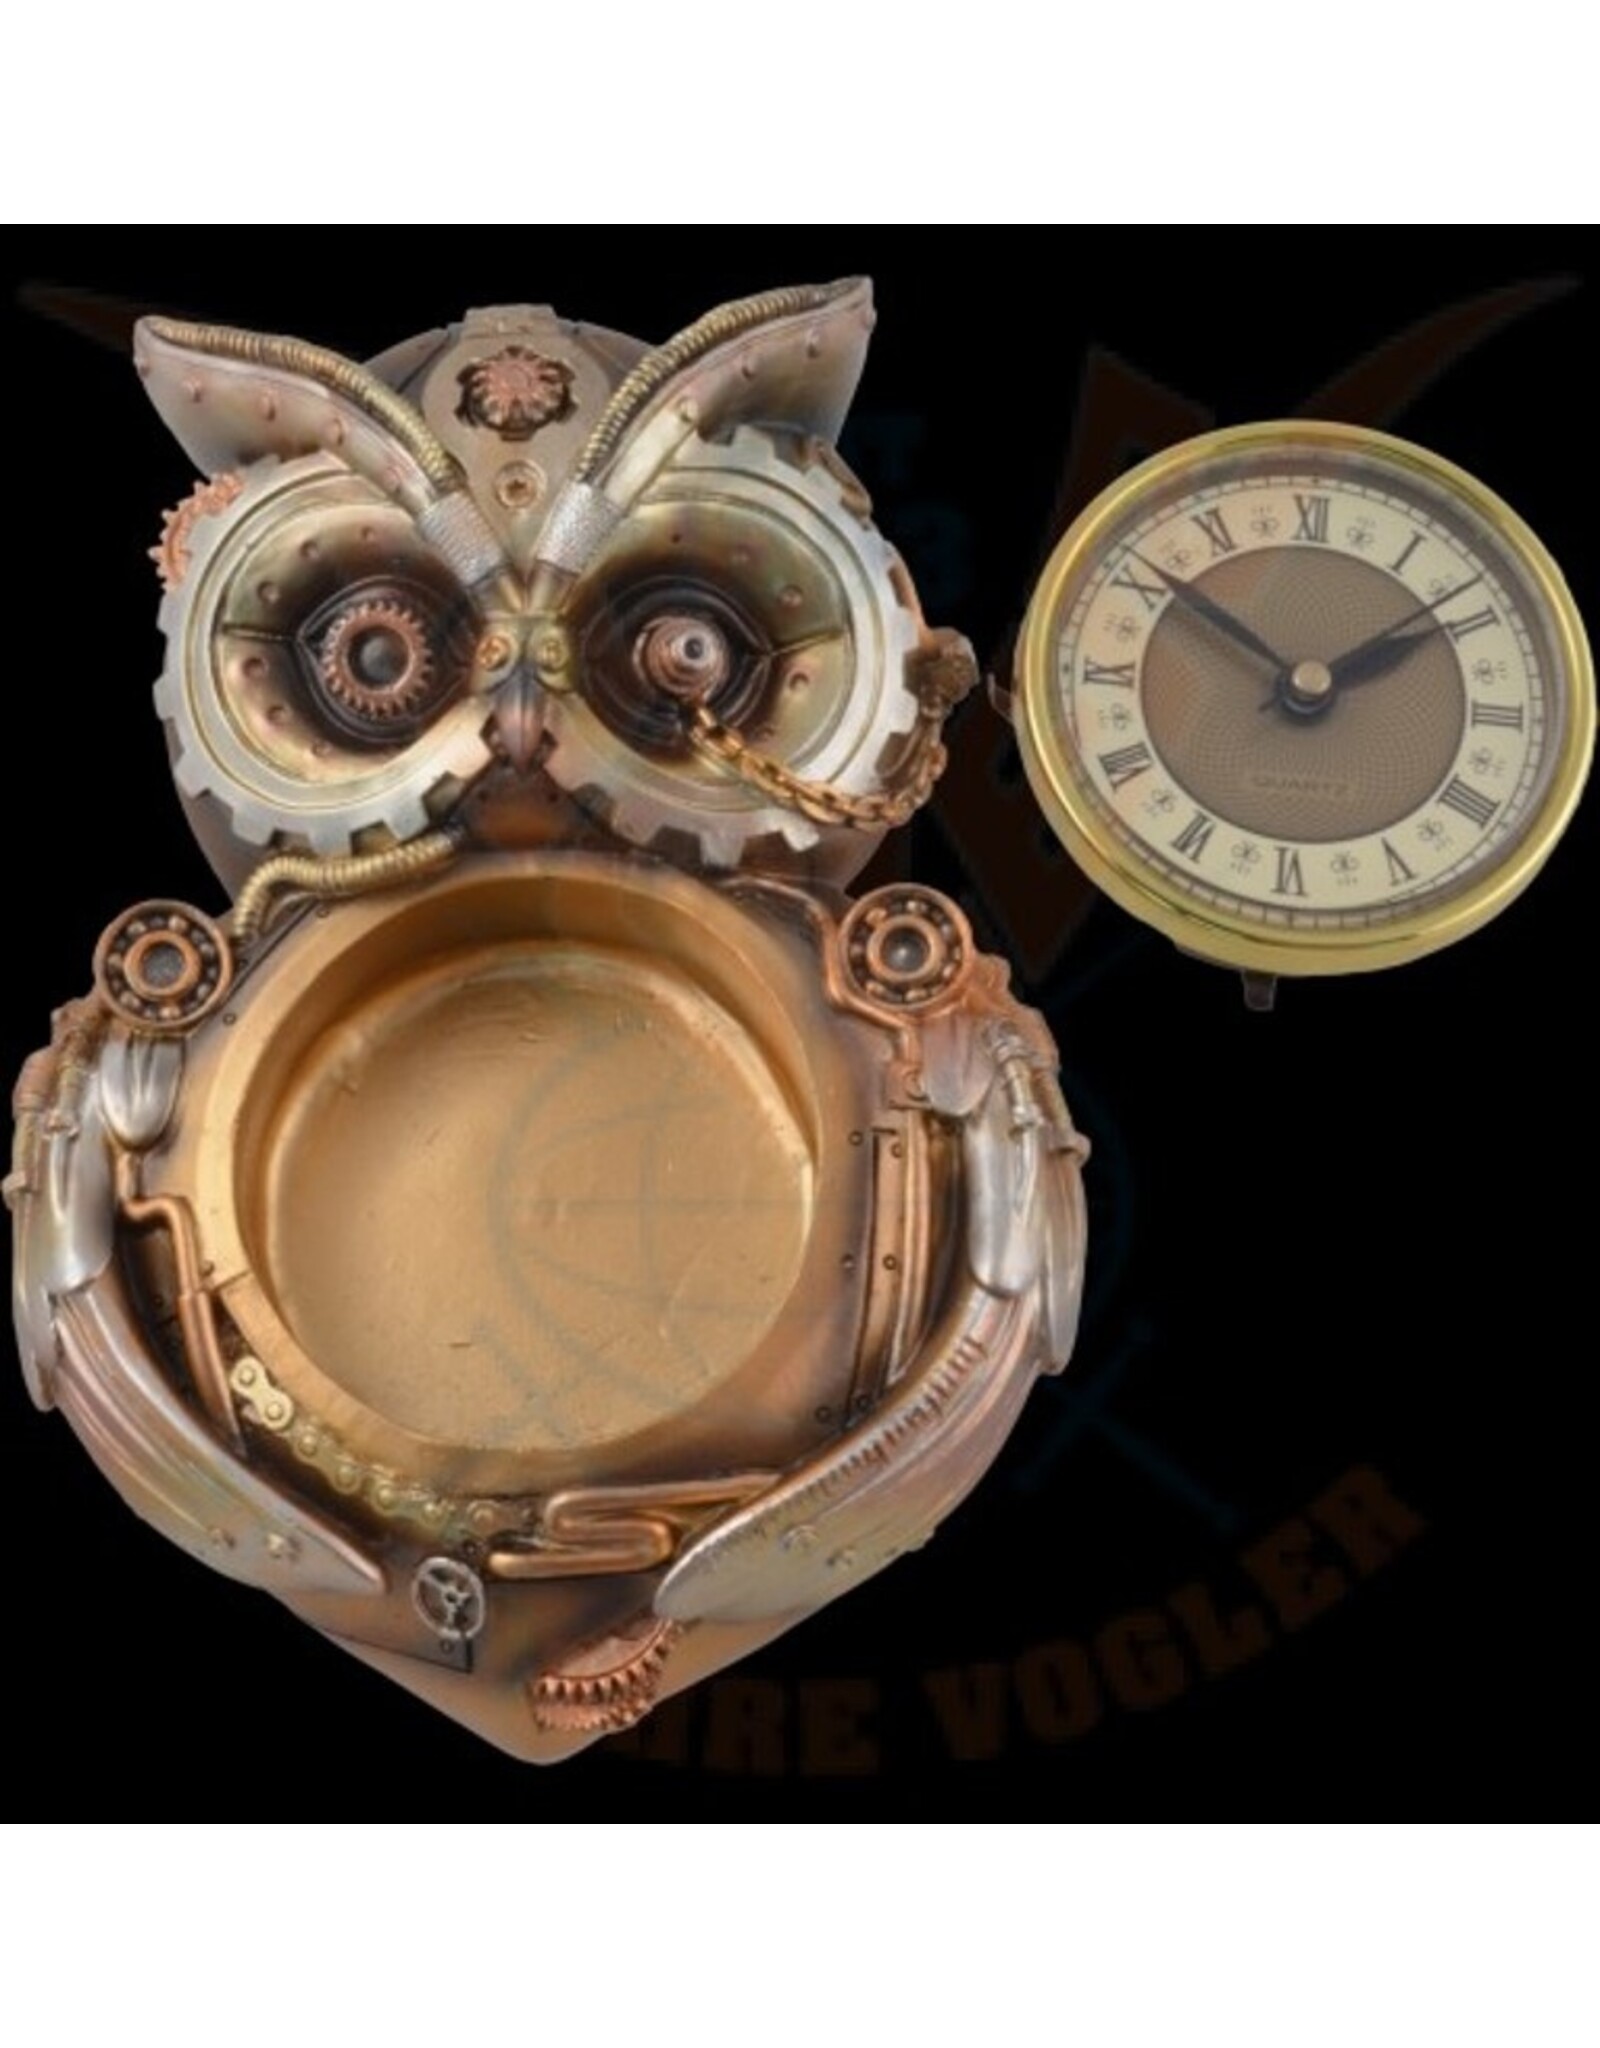 VG Giftware and Collectables - Steampunk Owl Wall Clock